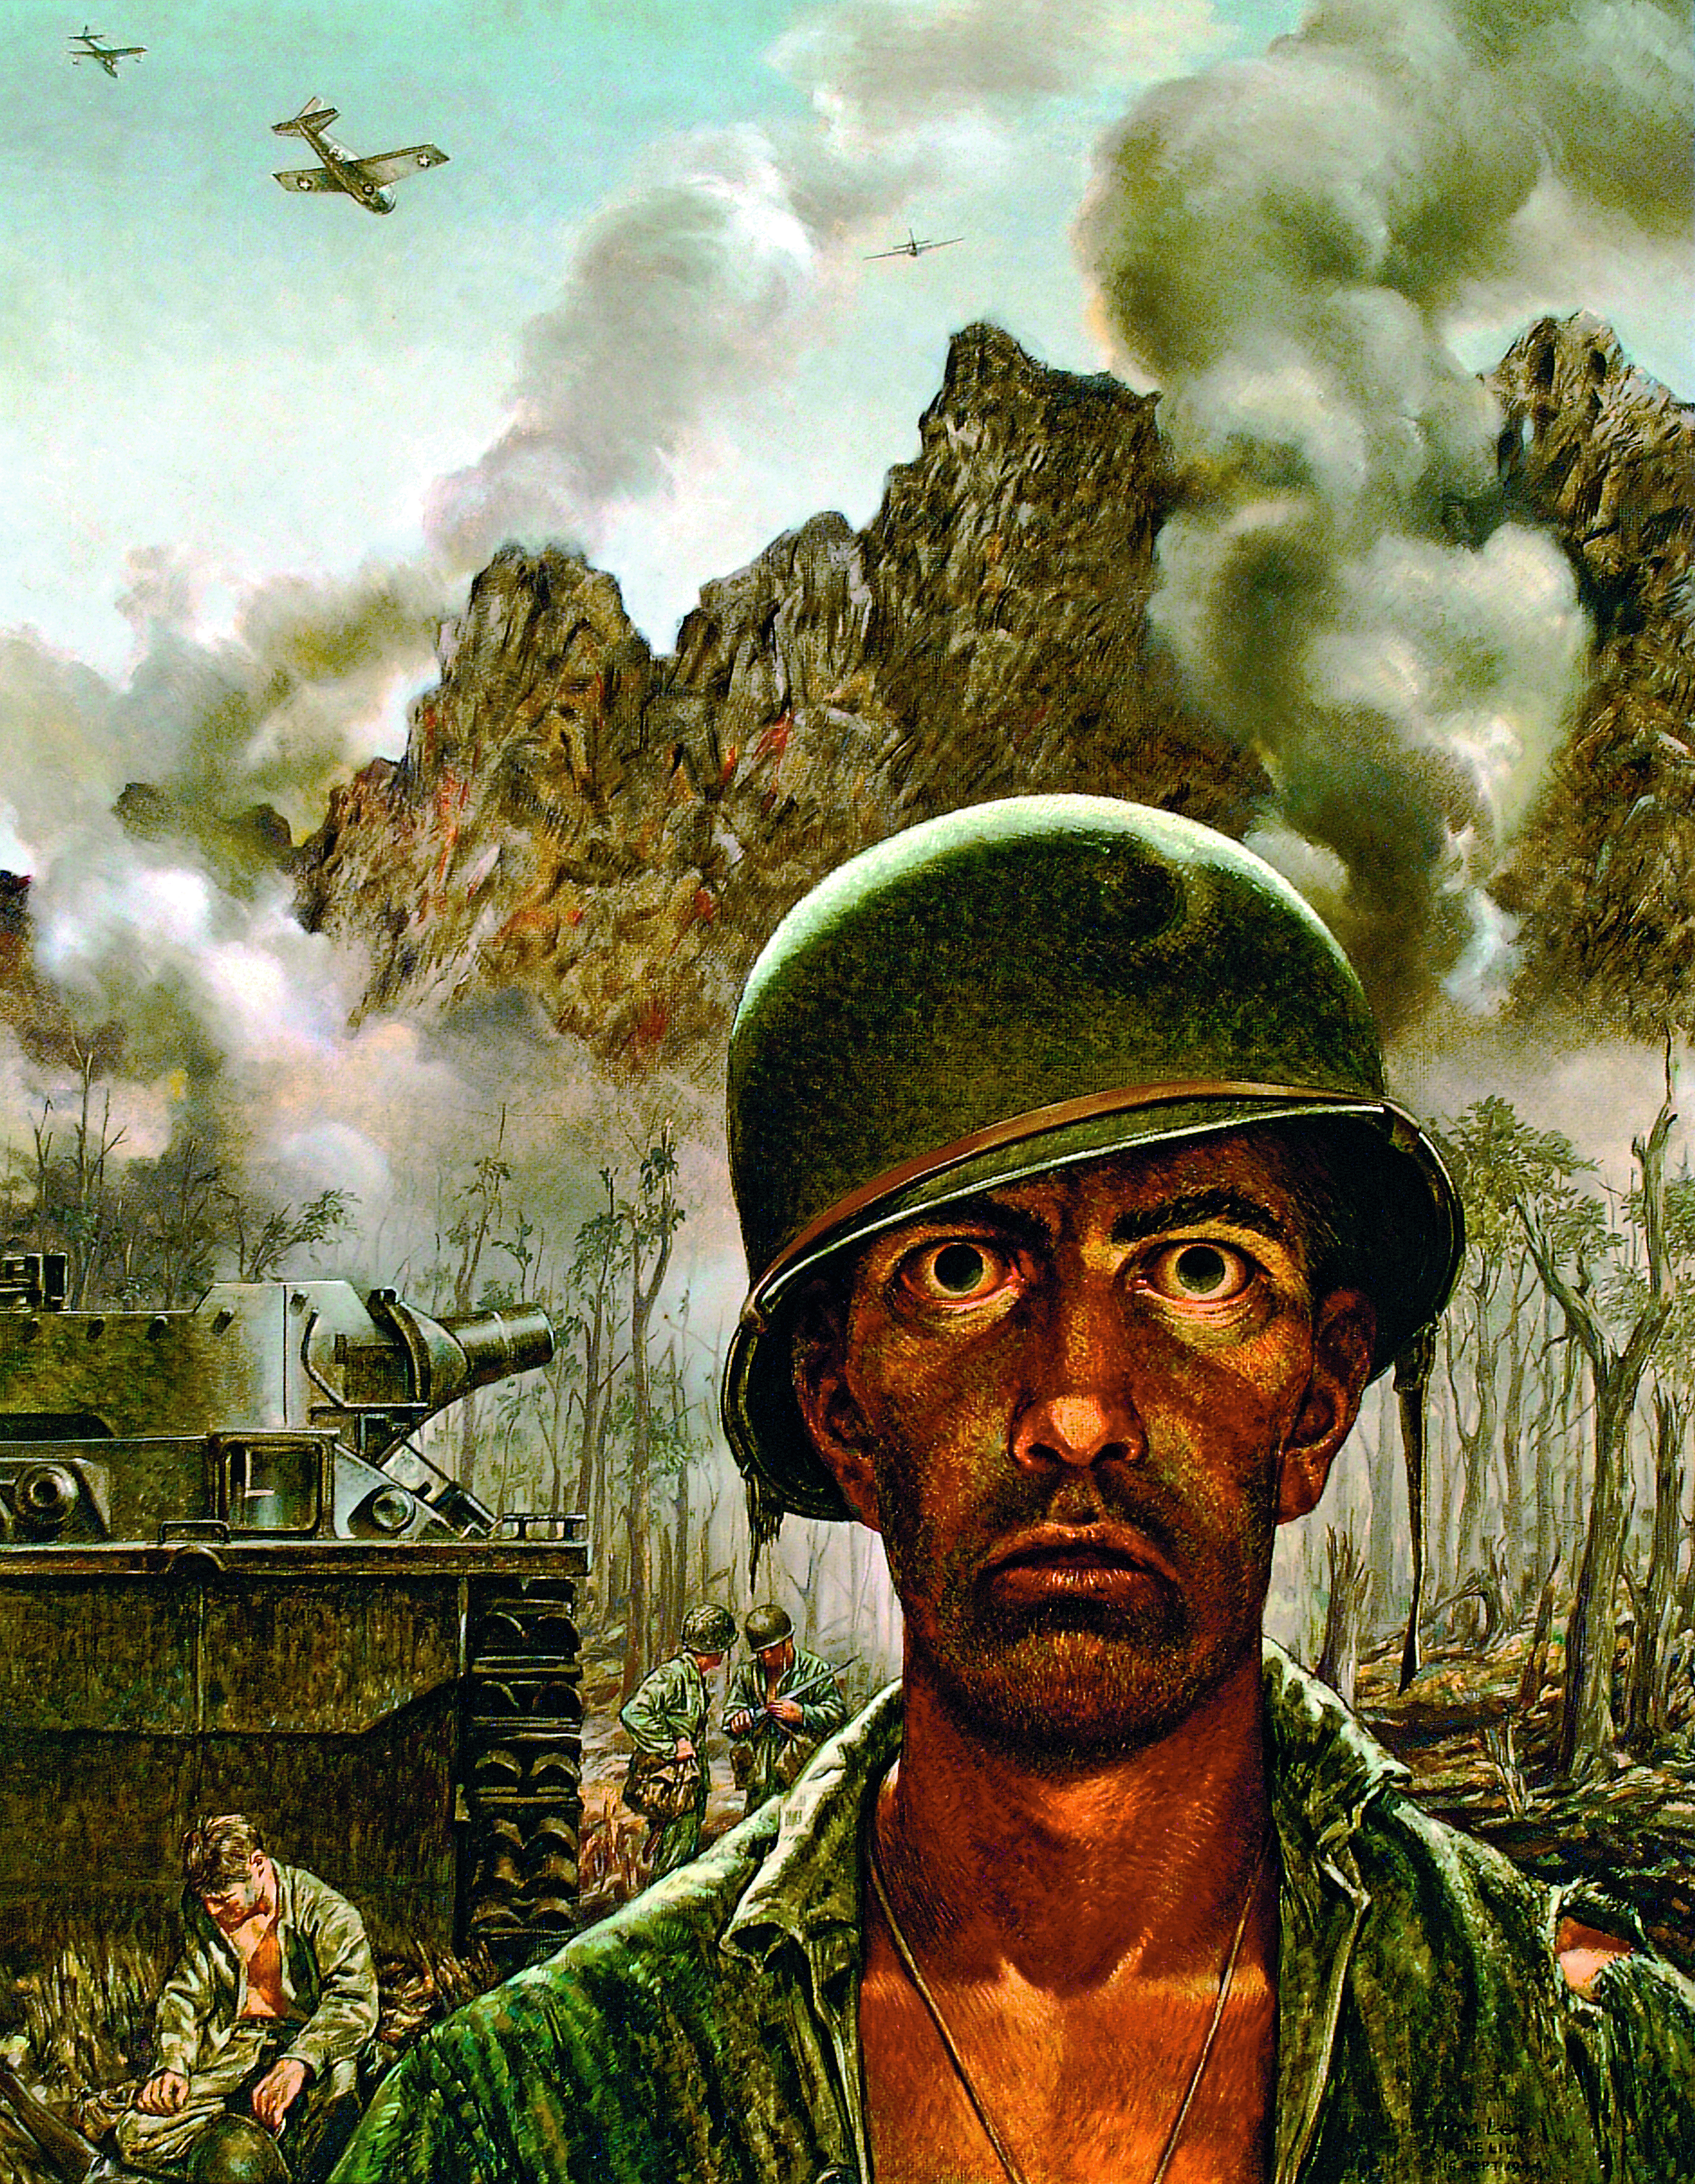 Tom Lea’s painting “That 2,000 Yard Stare,” which appeared in Life magazine in 1945, inspired the phrase often used to refer to the blank, detached gaze of traumatized soldiers 